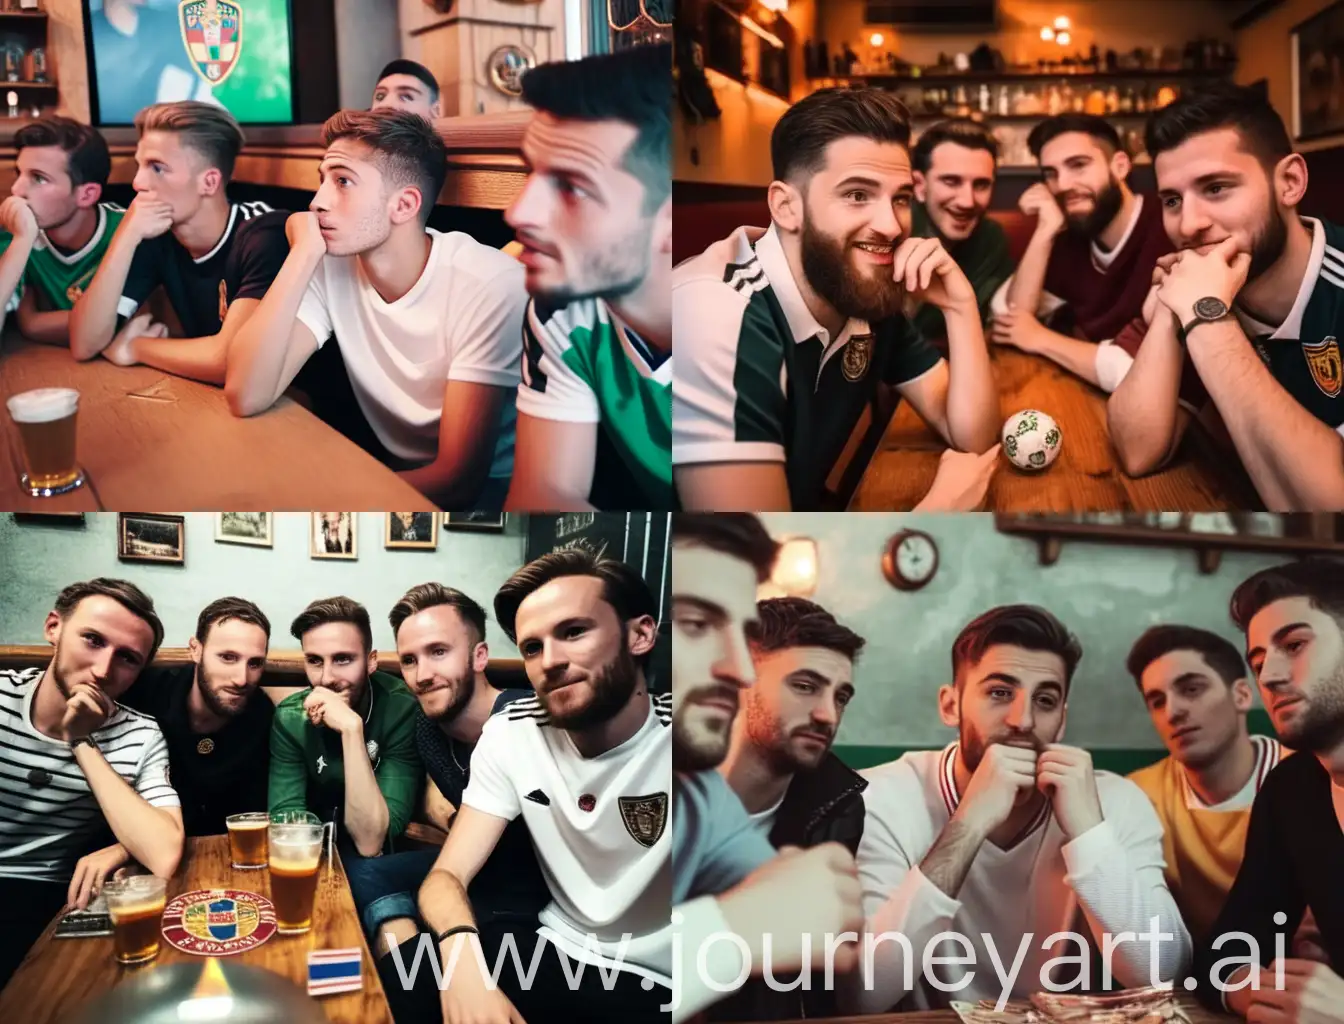 A high angle medium shot of 5 well-dressed young men aged 19-21 sitting in a pub, wearing Germany jerseys, watching a Euro Cup match. On the table in front of them are numerous banknotes. On the far left, Gelukas, with a brown beard and thinning hair, has a snus under his upper lip, and in front of him are his car keys and a snus can. Next to him is Geleon, who is overweight, also with a snus under his upper lip and smoking a vape, with his Mercedes keys in front of him. In the golden middle sits the centerpiece, Âghâ, with a crown on his head, sitting on a throne, with a black beard, six beers in front of him, and smoking a joint. Next to him is his friend Seige, a lightskin boxer, with six beers in front of him, also smoking a joint. Beside Seige sits Konsti, a good looking blond guy with curls with six beers in front of him and a snus under his upper lip, resembling a chameleon. The pub is lively with dim lighting, and the atmosphere is festive. Shot with a Canon EOS-1D X Mark III, 50mm f/1.4 lens, vibrant colors